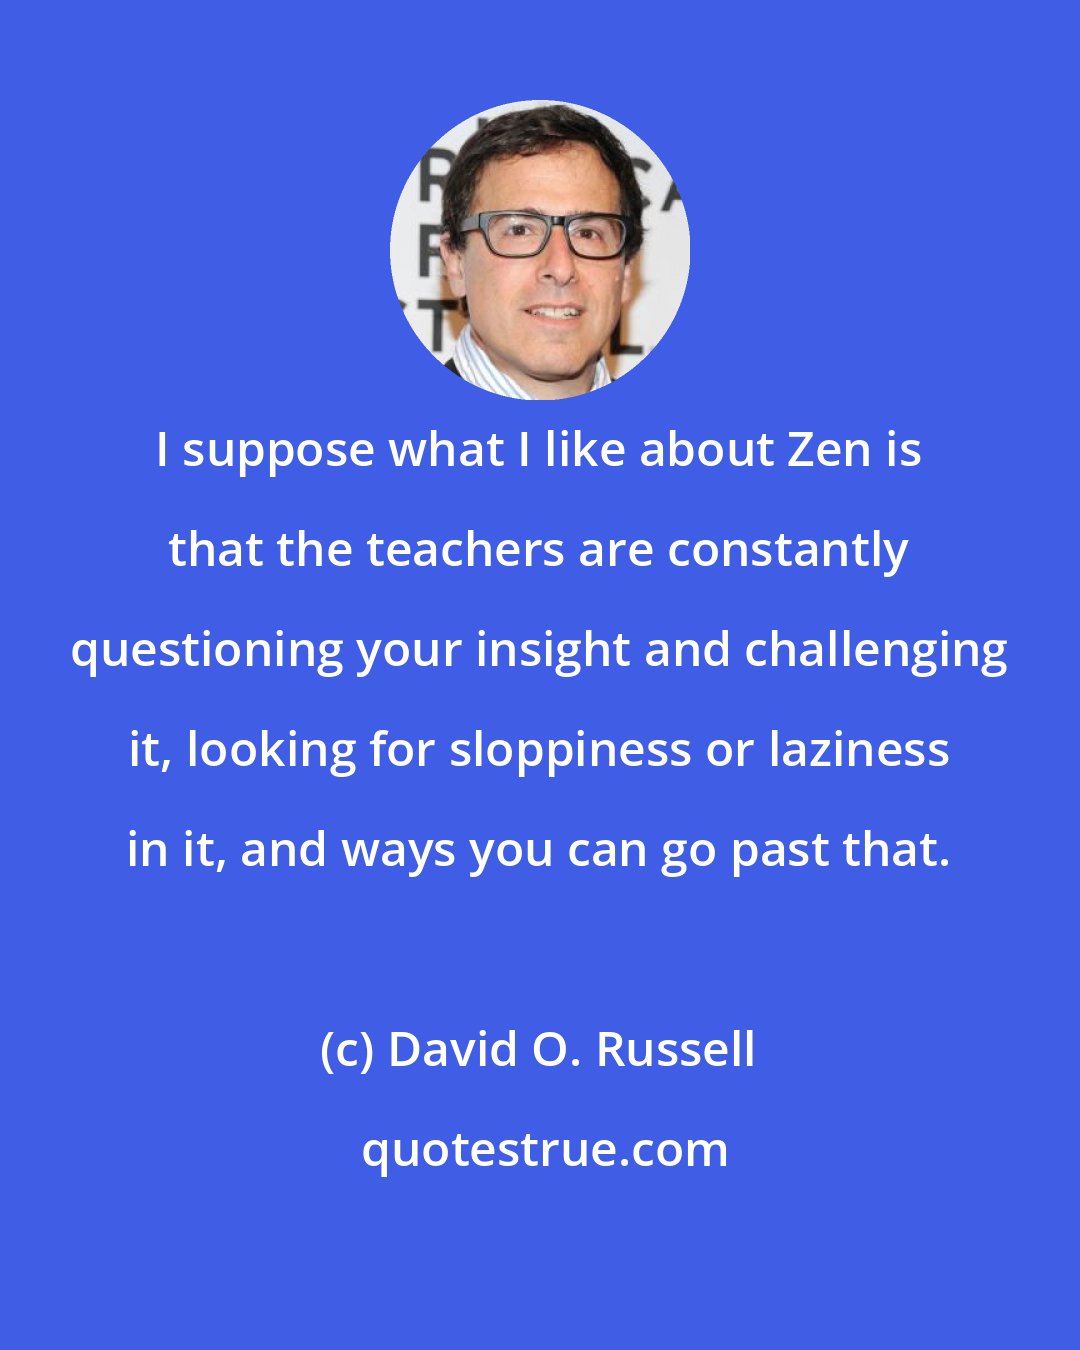 David O. Russell: I suppose what I like about Zen is that the teachers are constantly questioning your insight and challenging it, looking for sloppiness or laziness in it, and ways you can go past that.